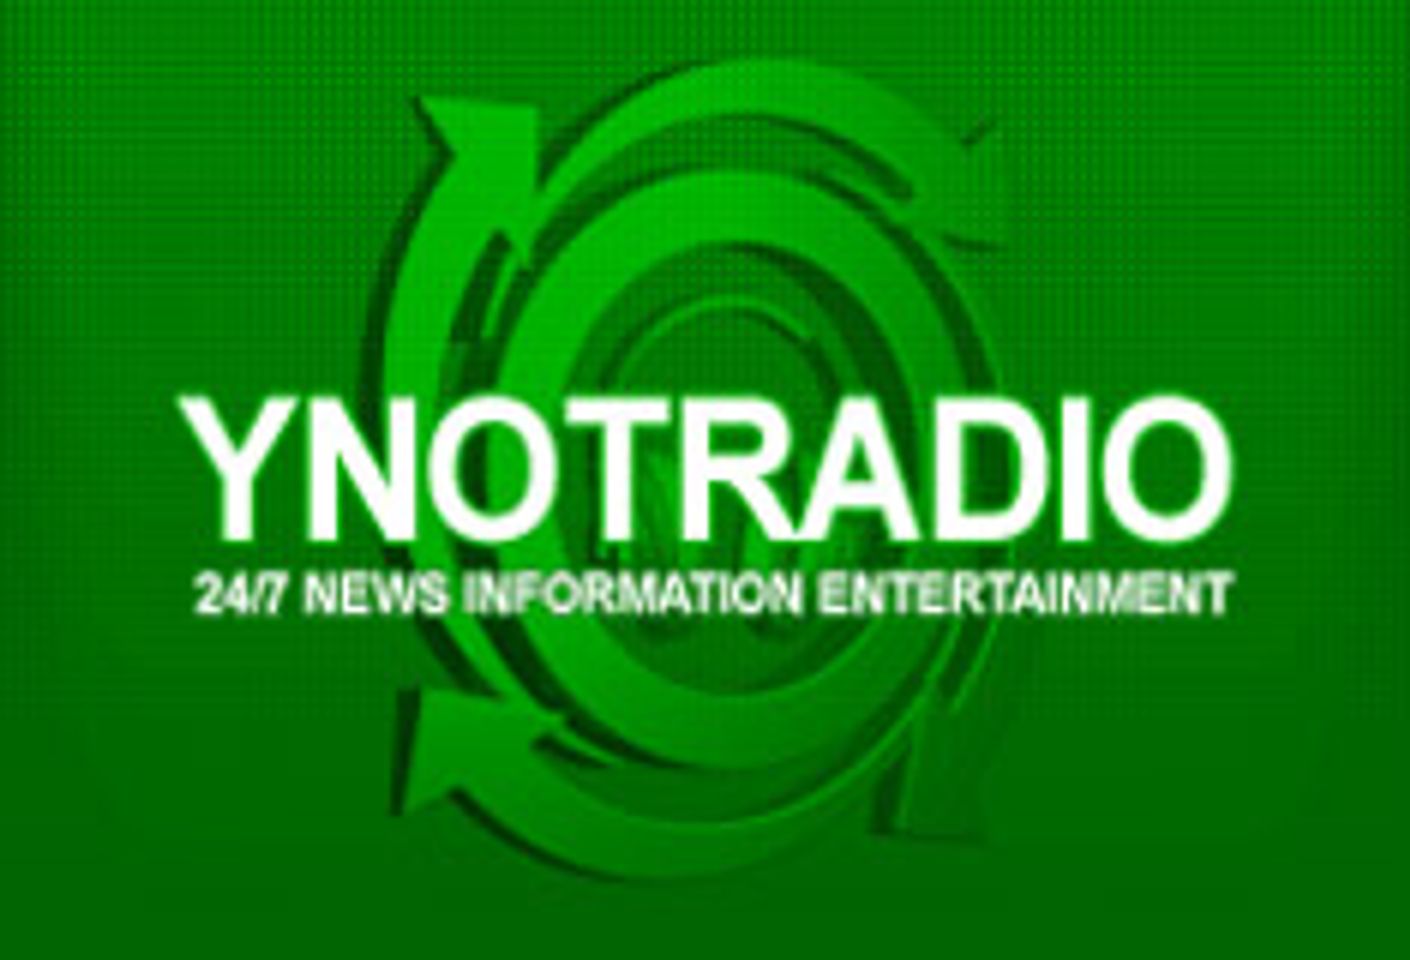 YNOT Radio.com Officially Launches